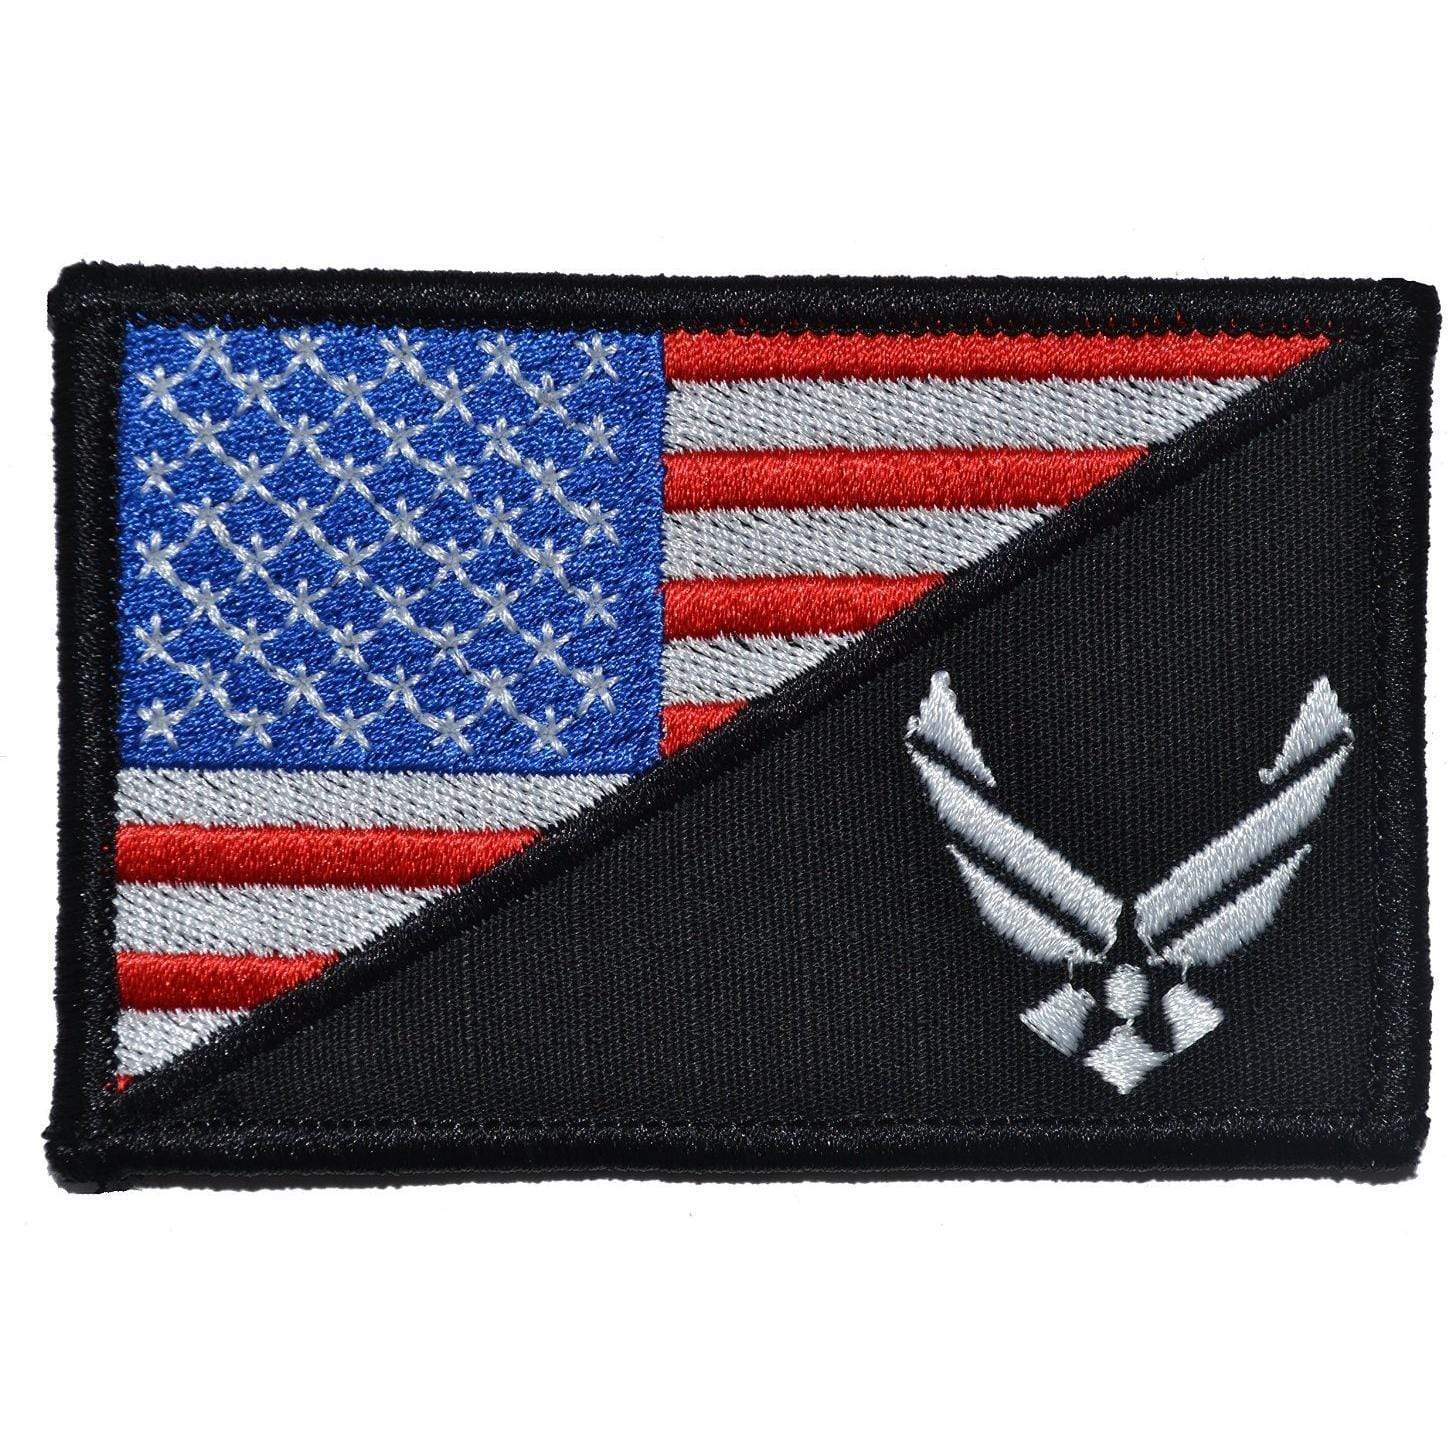 Tactical Gear Junkie Patches Full Color U.S. Air Force Emblem USA Flag - 2.25x3.5 Patch